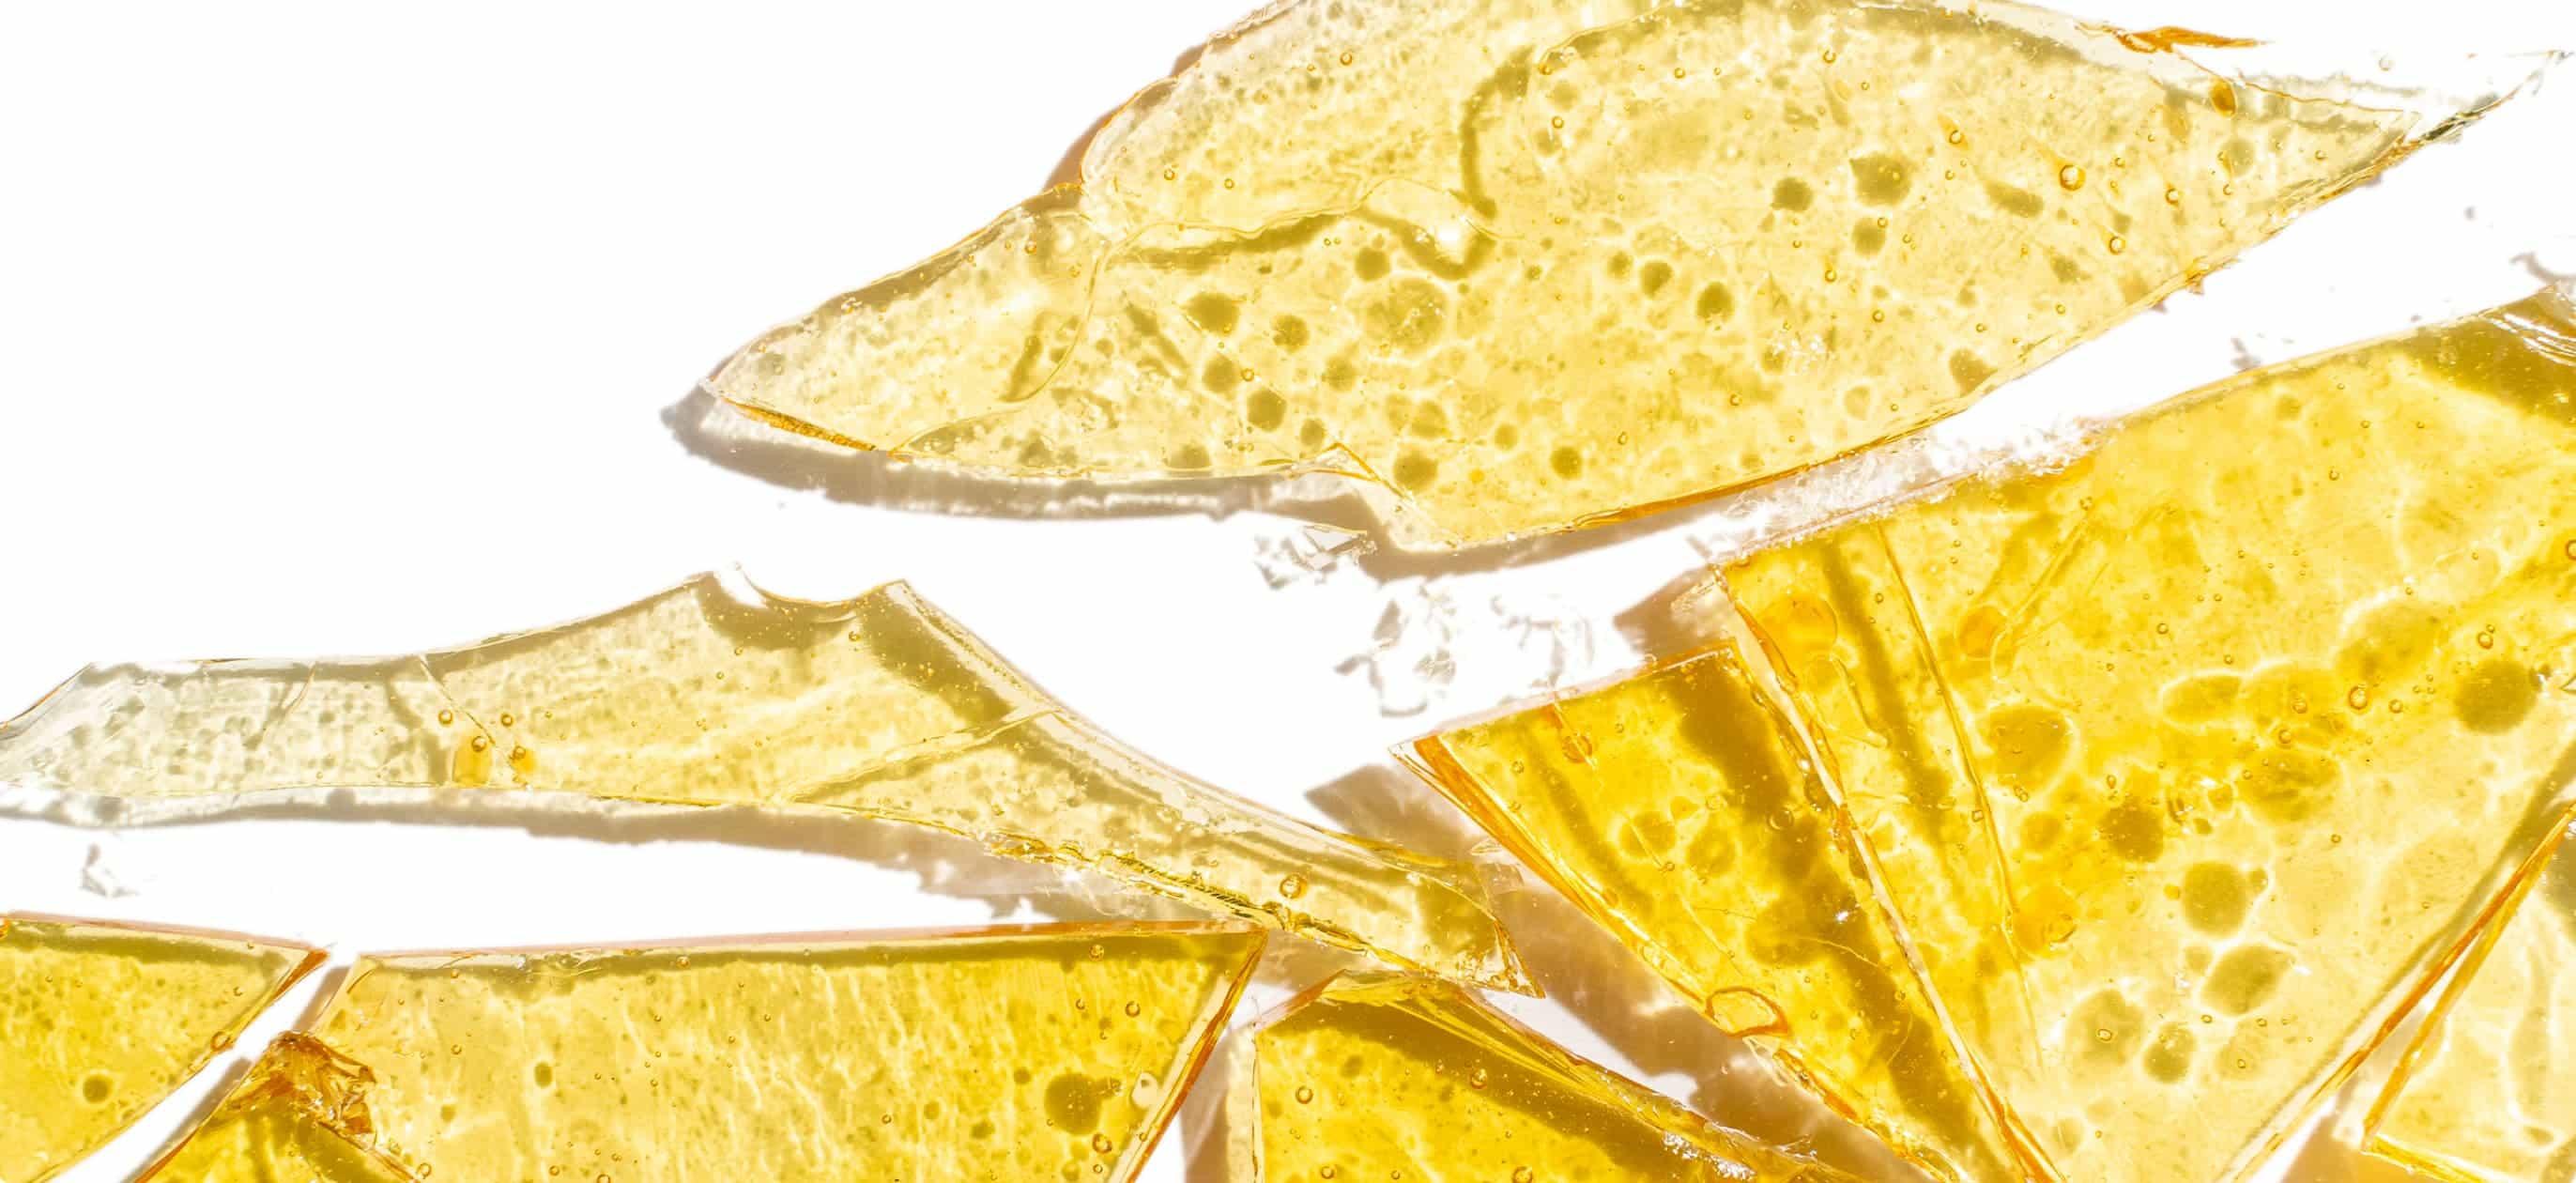 A close-up of large pieces of cannabis shatter on a white background